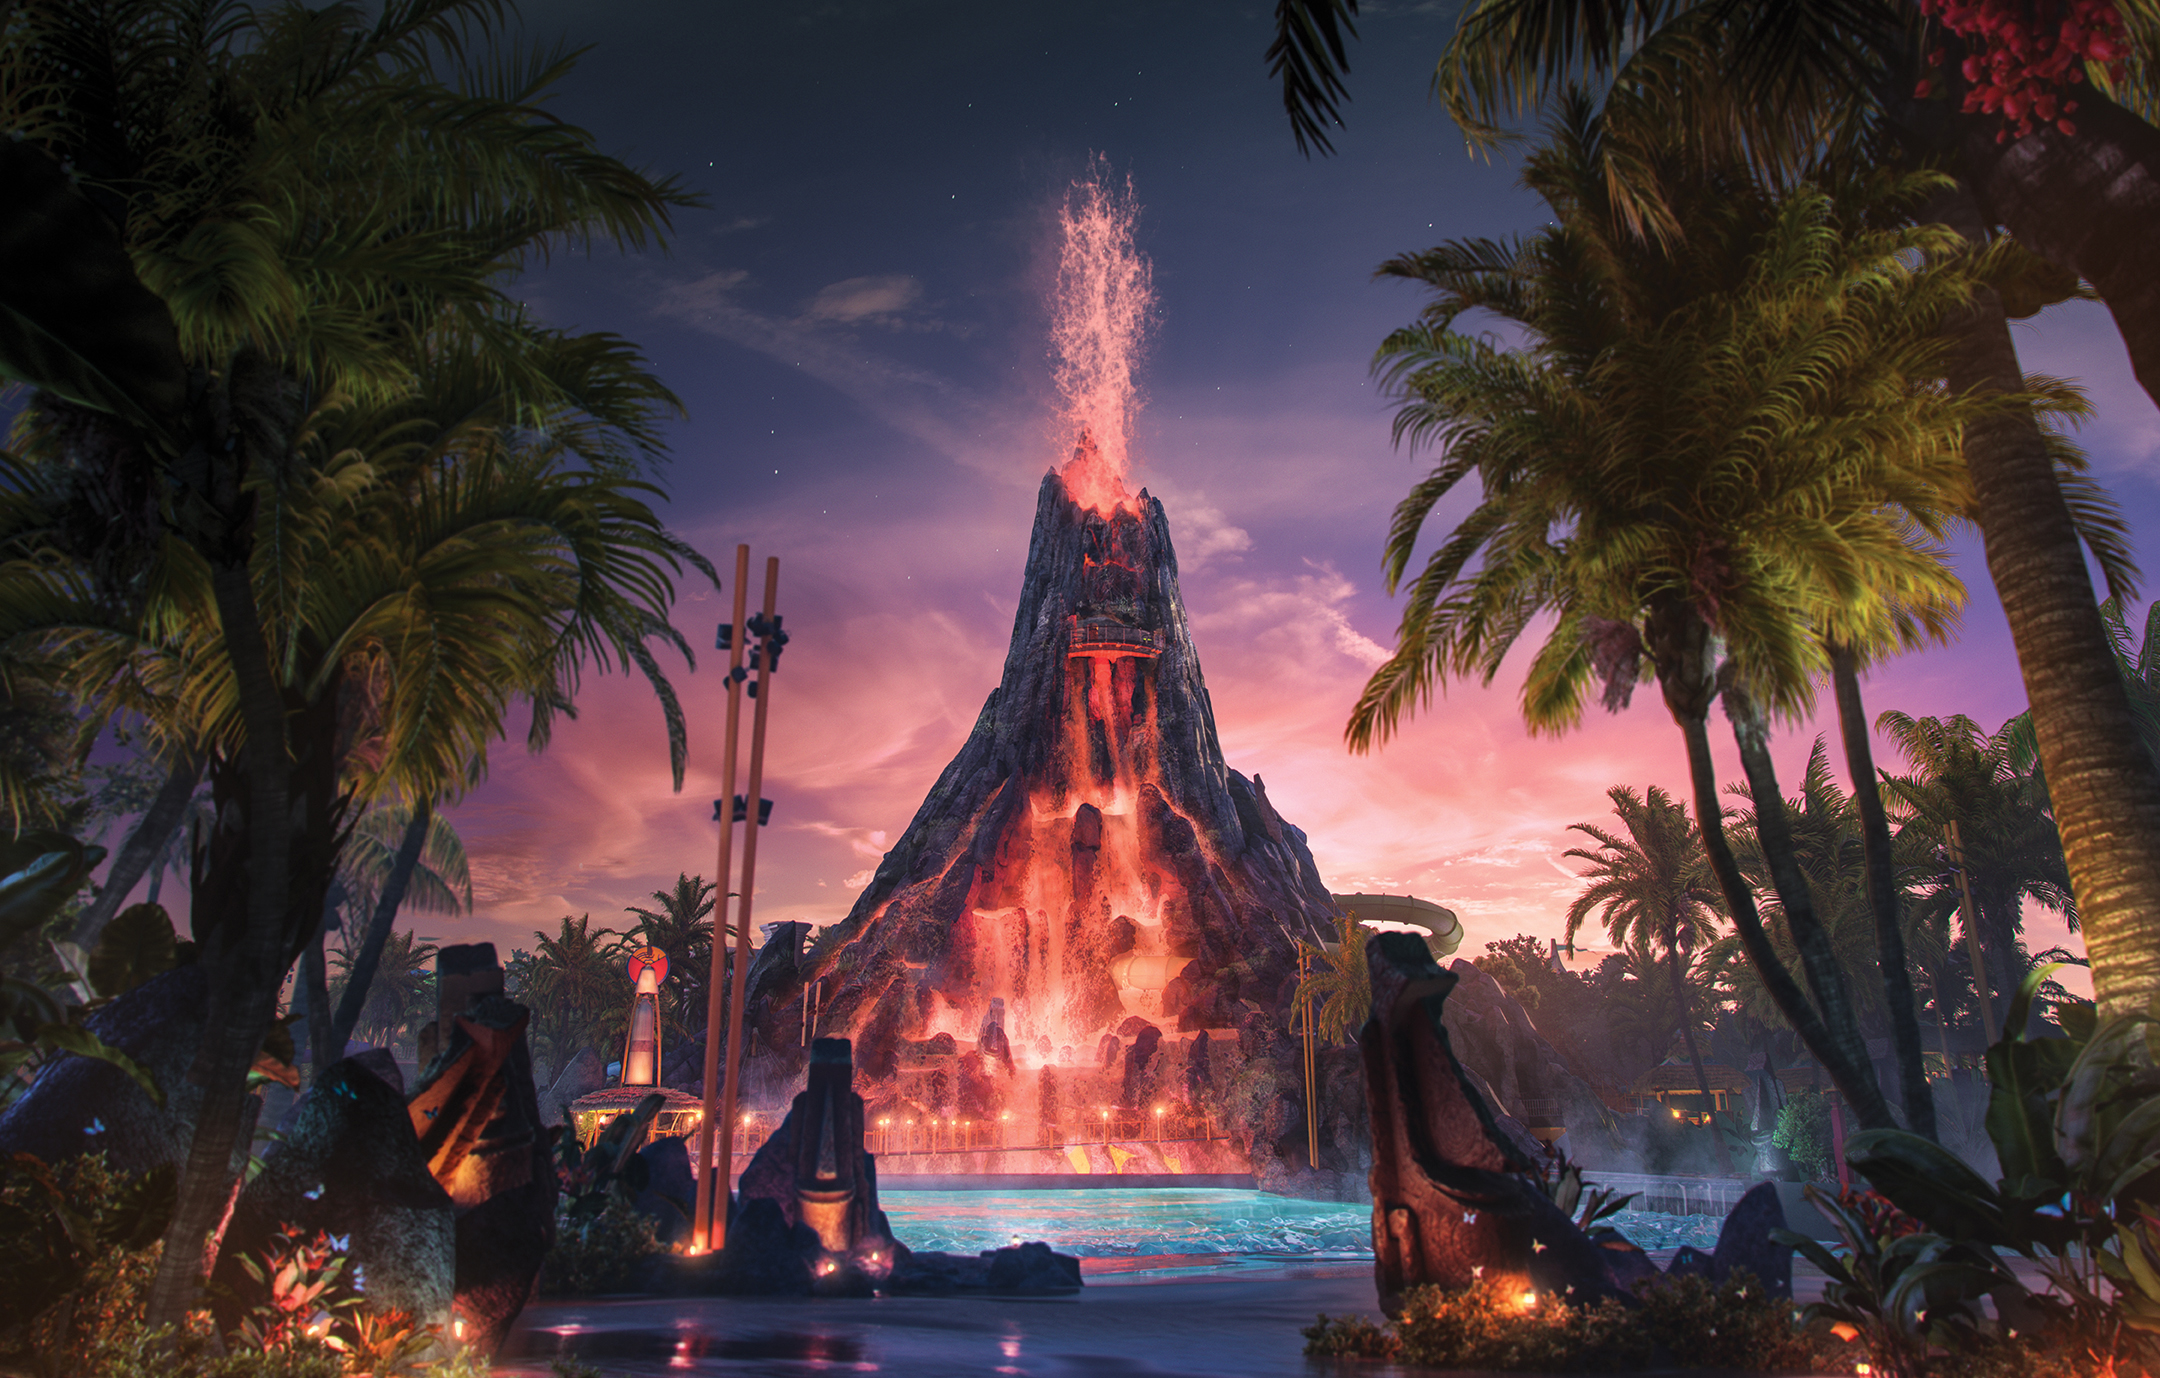 Evening views of Universal's new Volcano Bay, a new waterpark opening summer 2017.